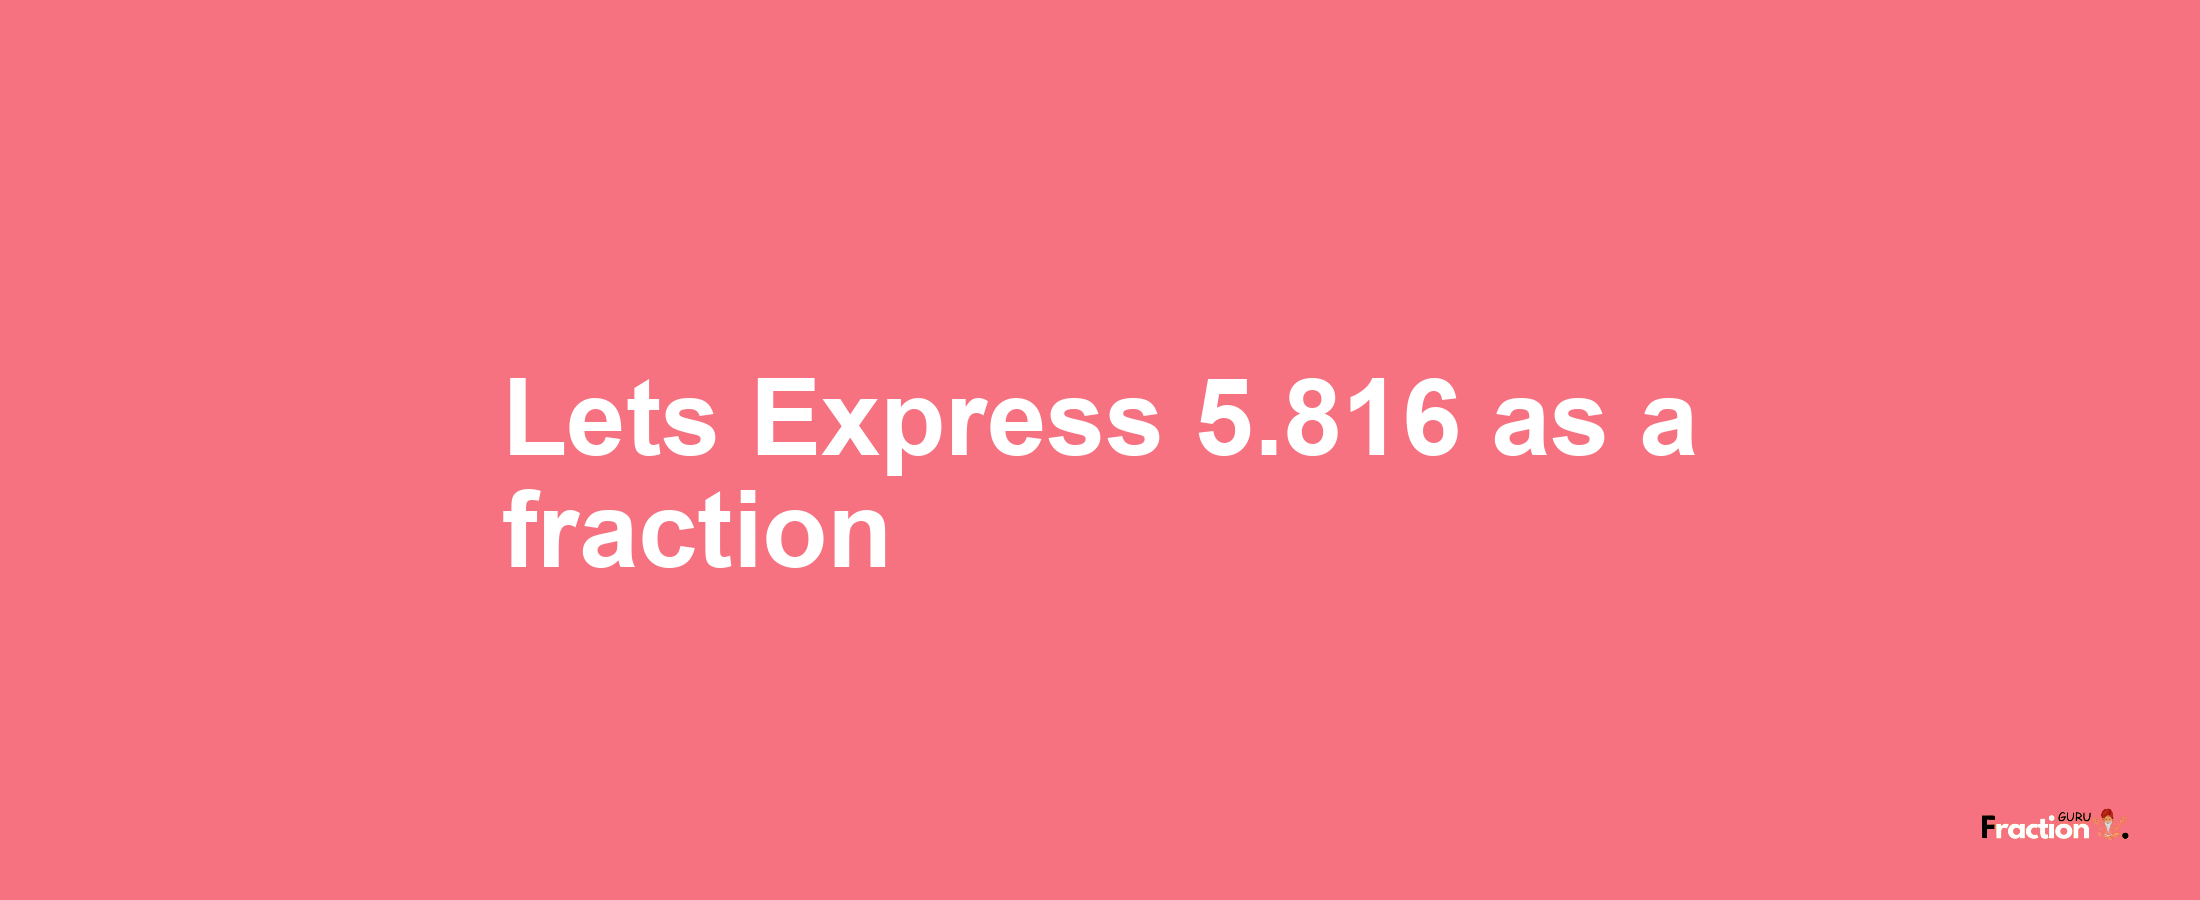 Lets Express 5.816 as afraction